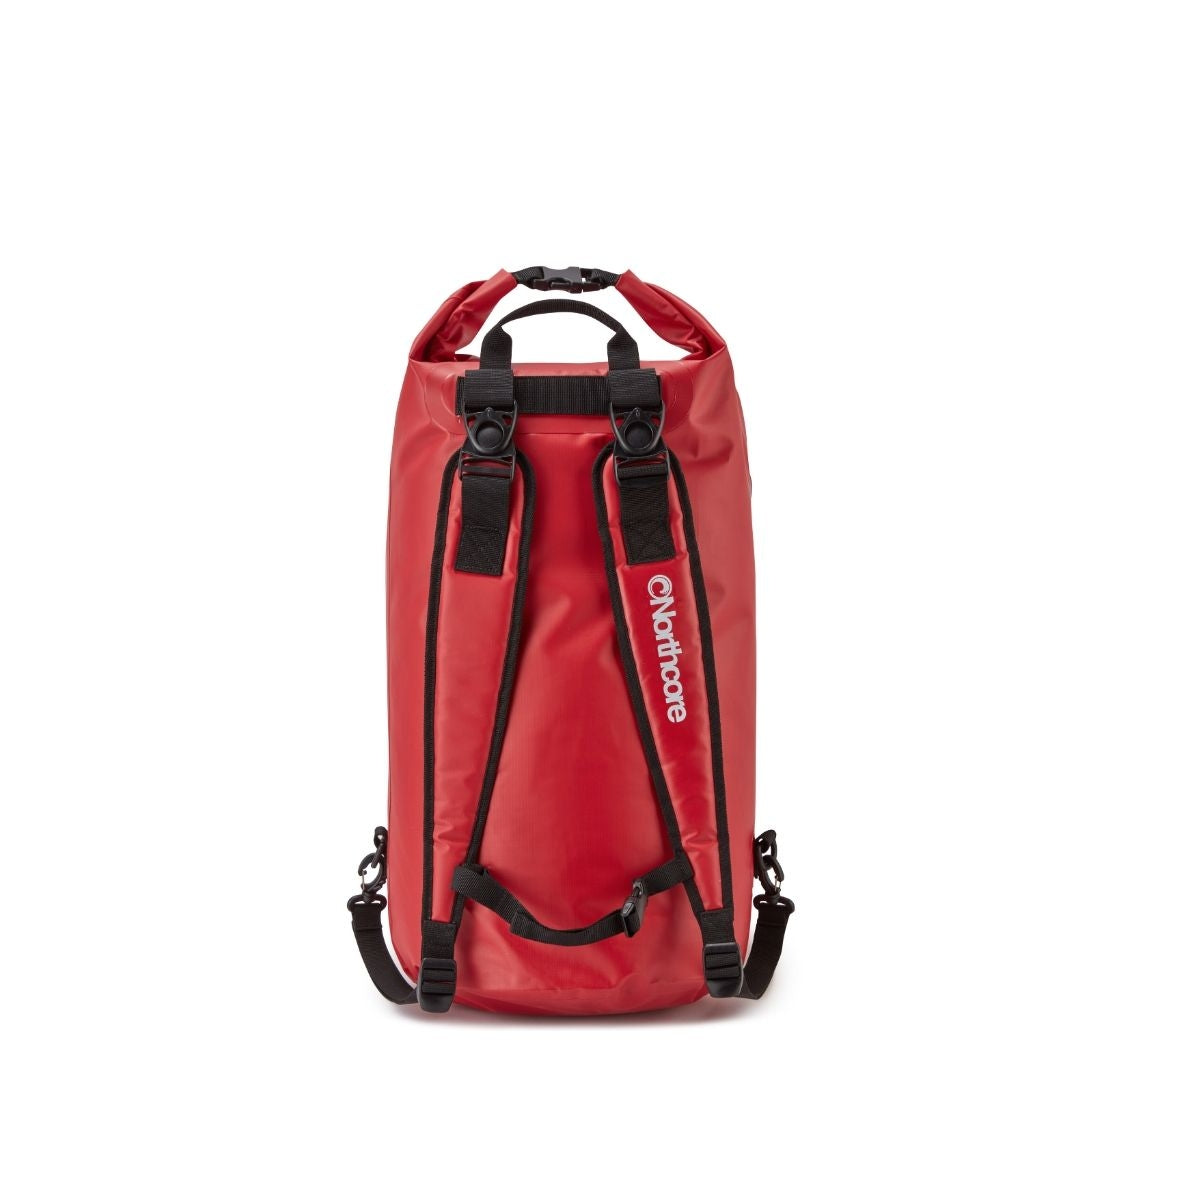 Northcore Waterproof Dry Bag Backpack 20l Red